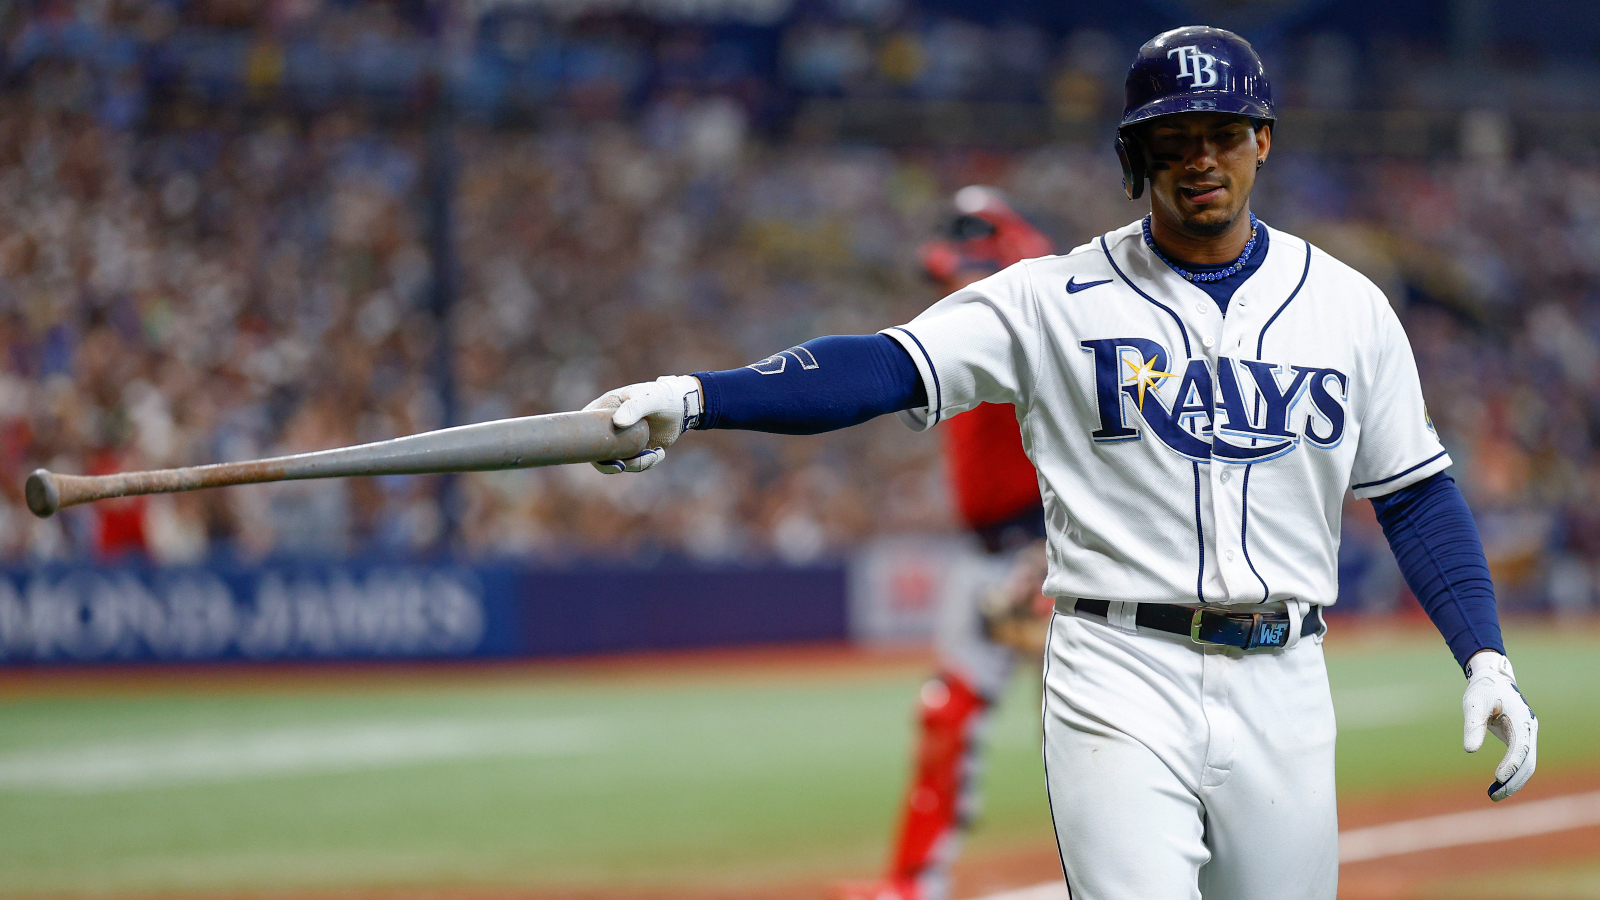 Tampa Bay Rays player Wander Franco is under investigation by the